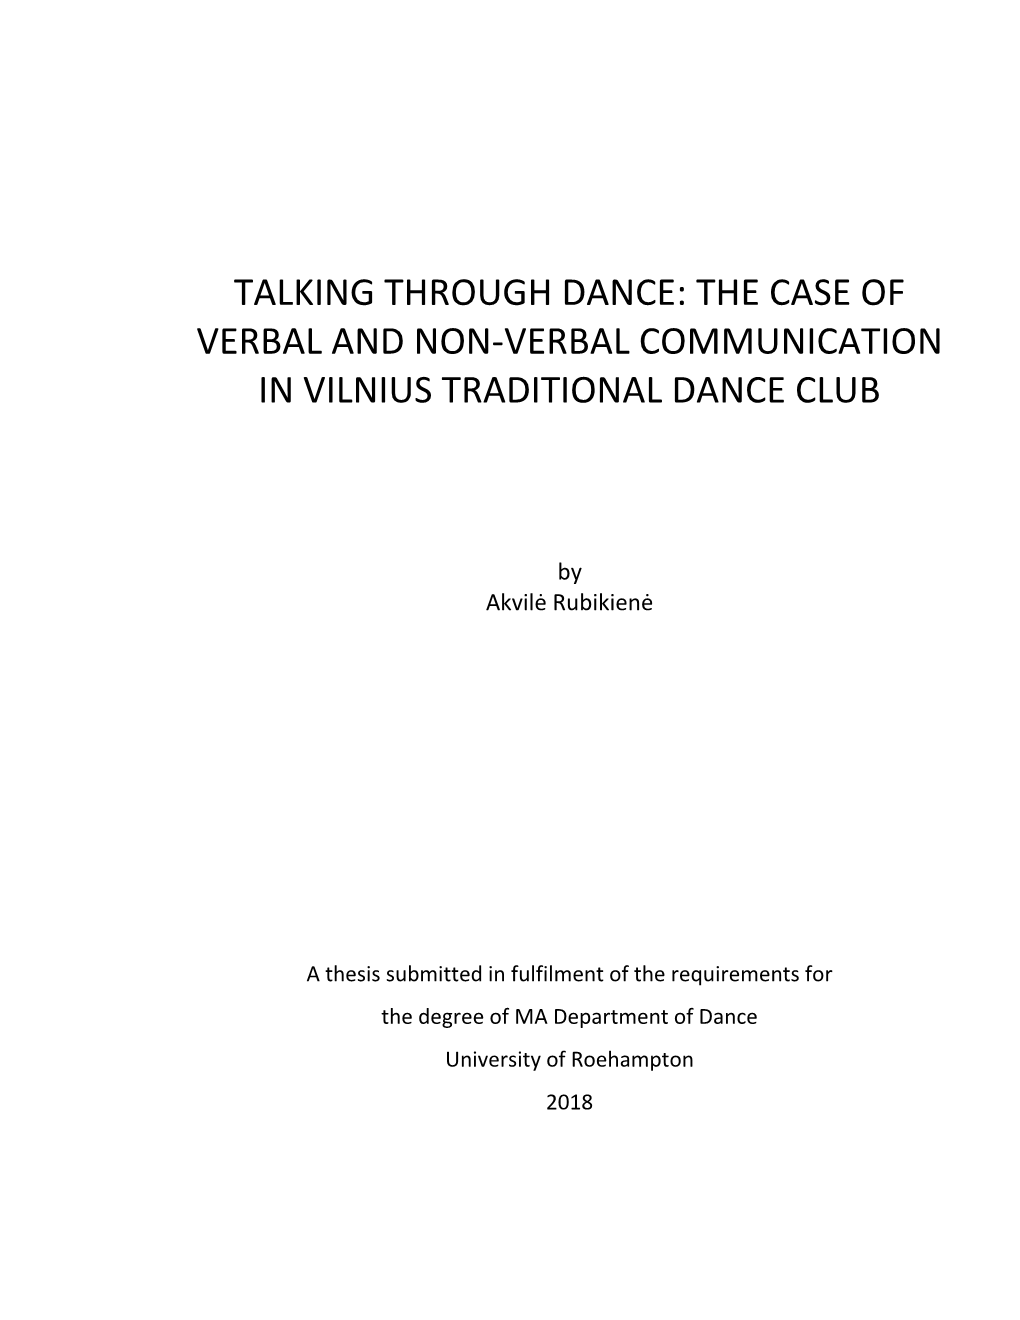 The Case of Verbal and Non-Verbal Communication in Vilnius Traditional Dance Club